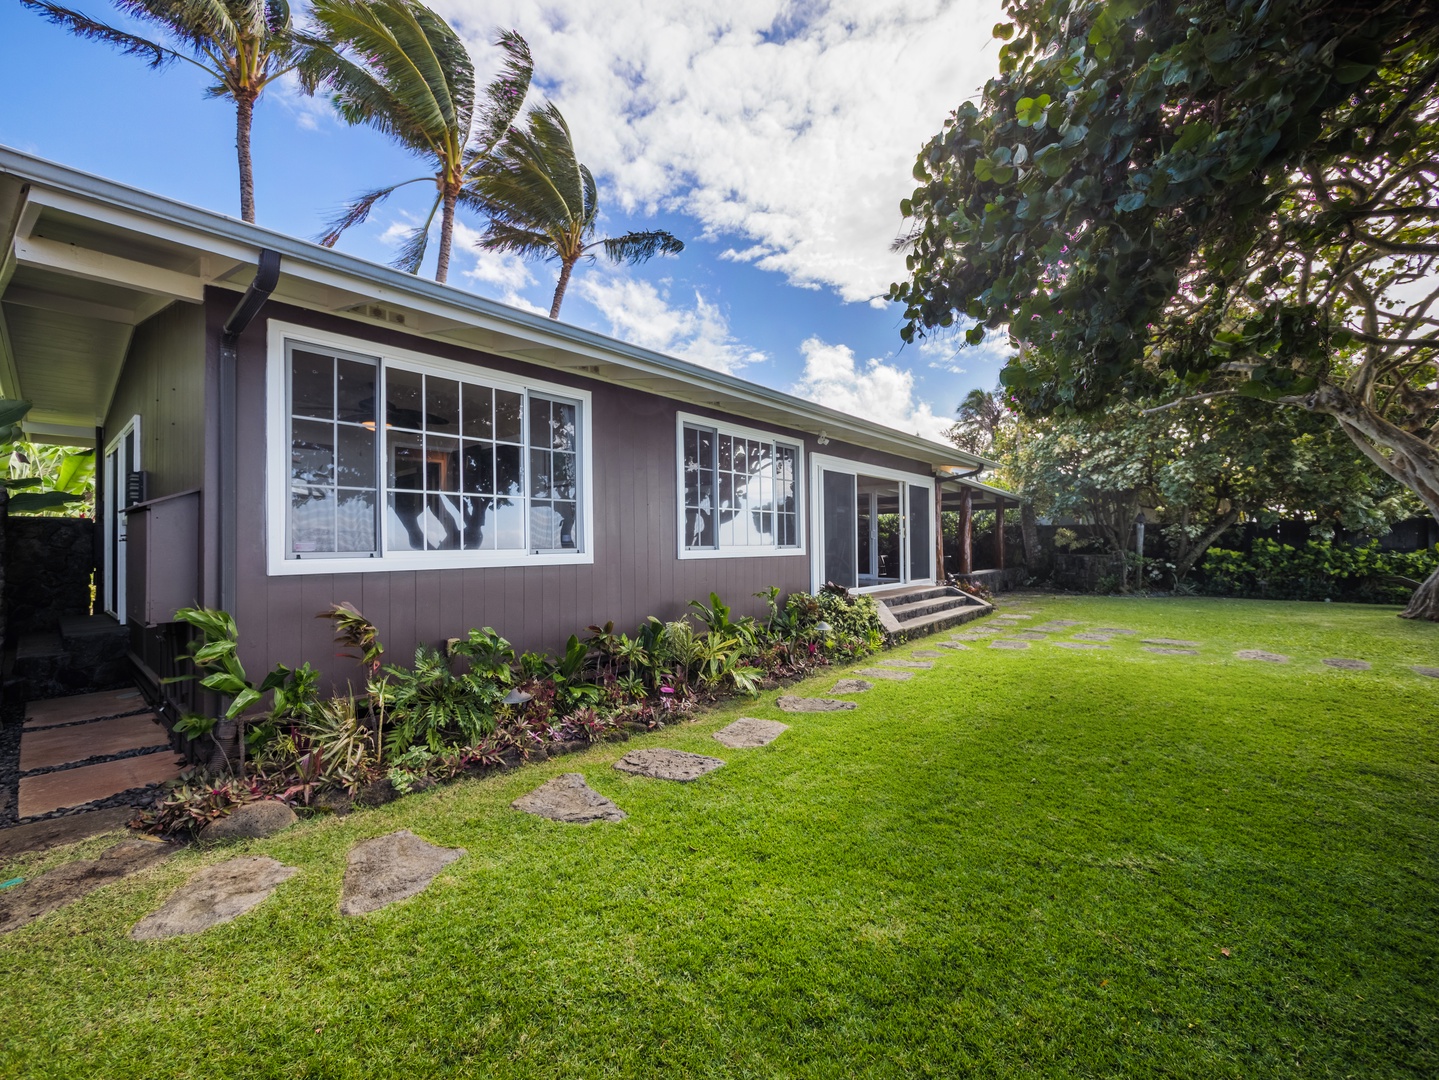 Haleiwa Vacation Rentals, Sunset Point Hawaiian Beachfront** - Lush green yards for a fun family time.